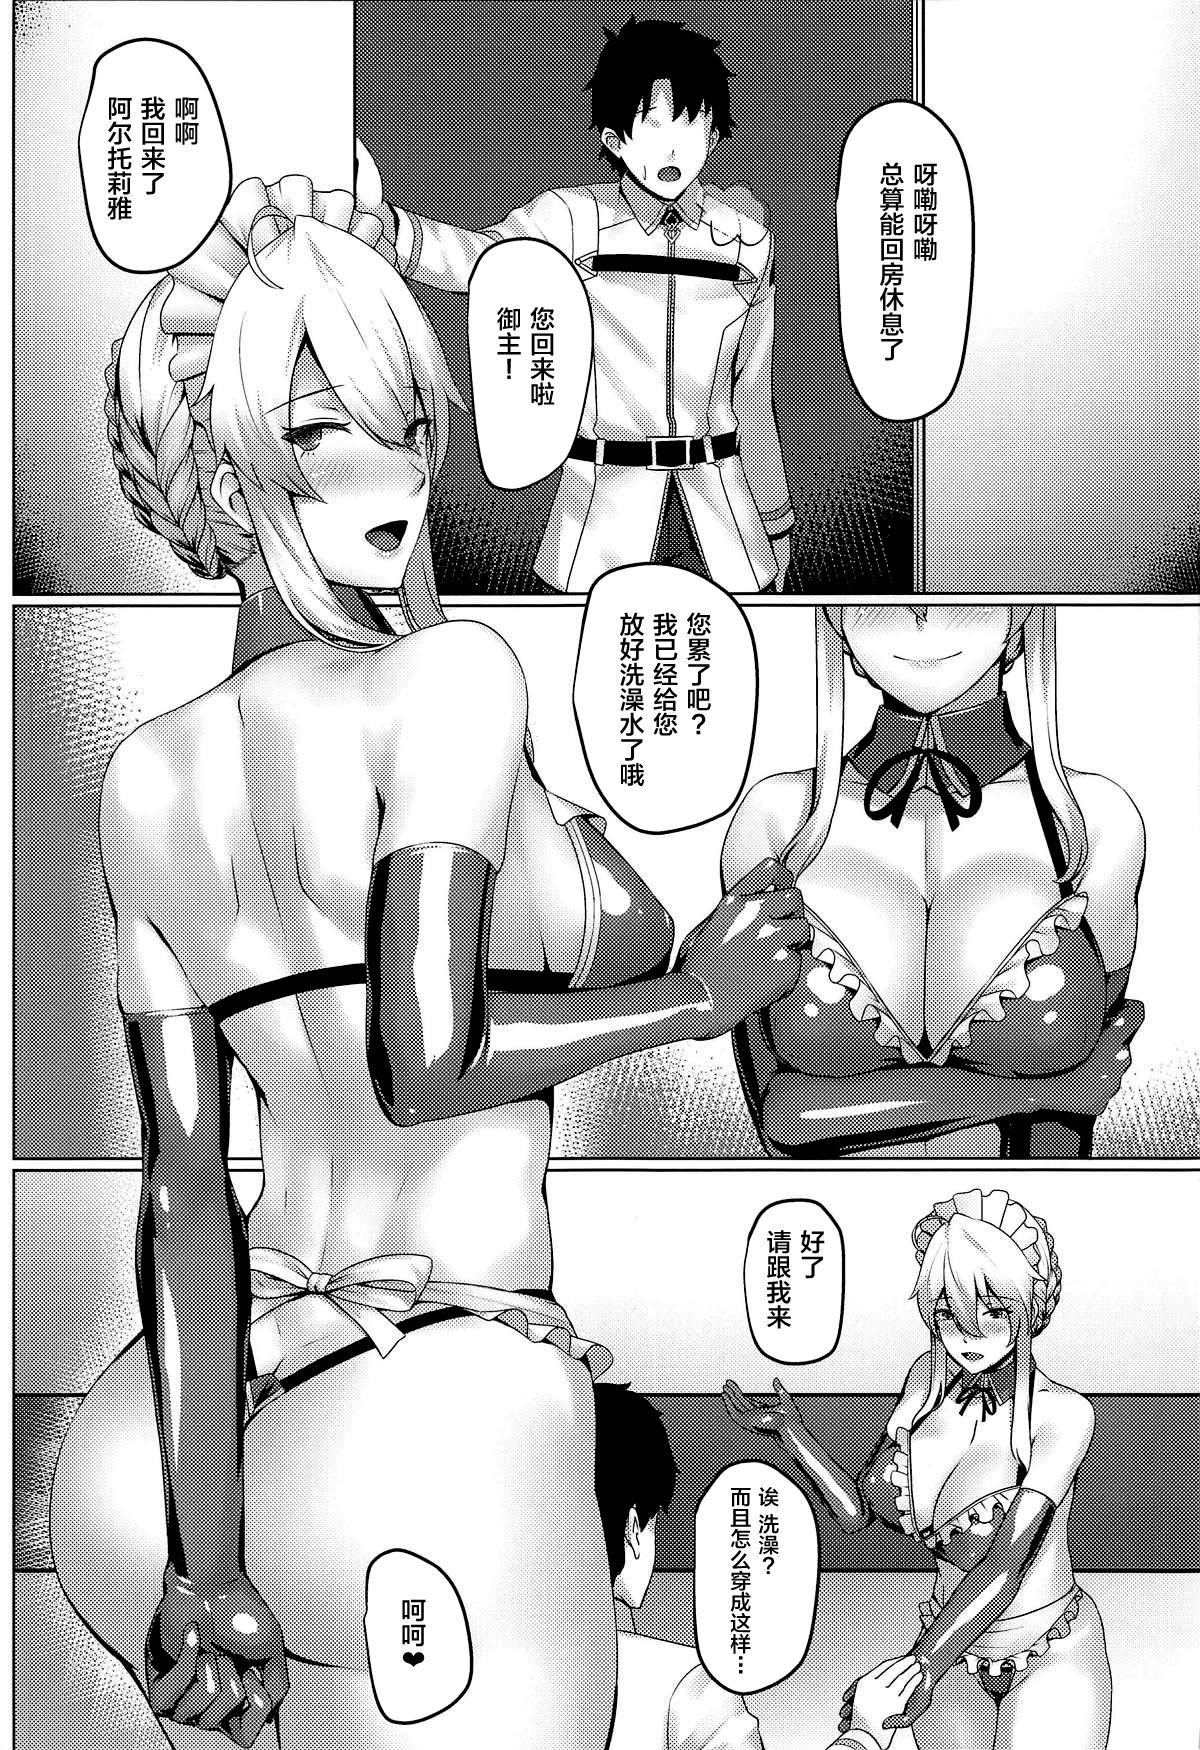 Dicks ACTING LIKE - Fate grand order Scissoring - Page 9